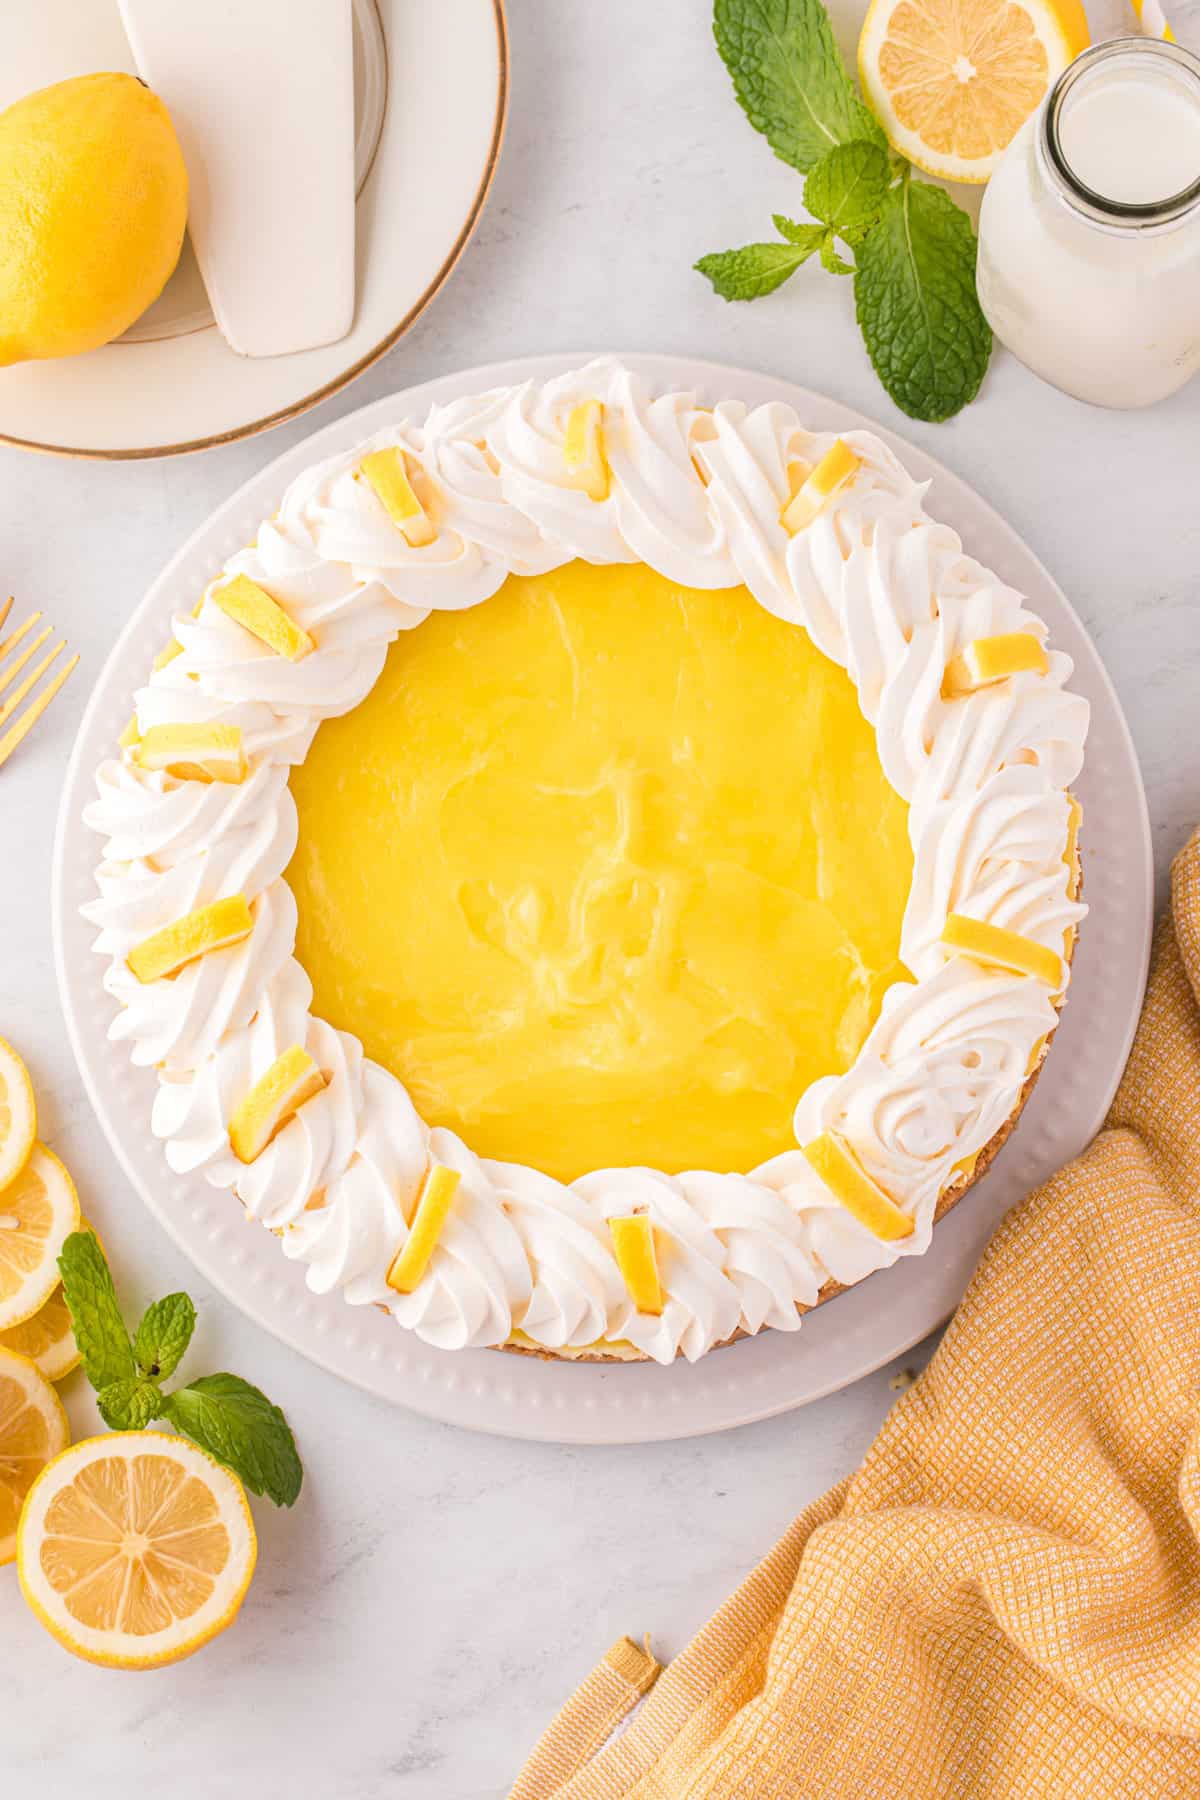 Lemon Cheesecake with Lemon Curd, Whipped Topping, and Fresh Lemon Slices